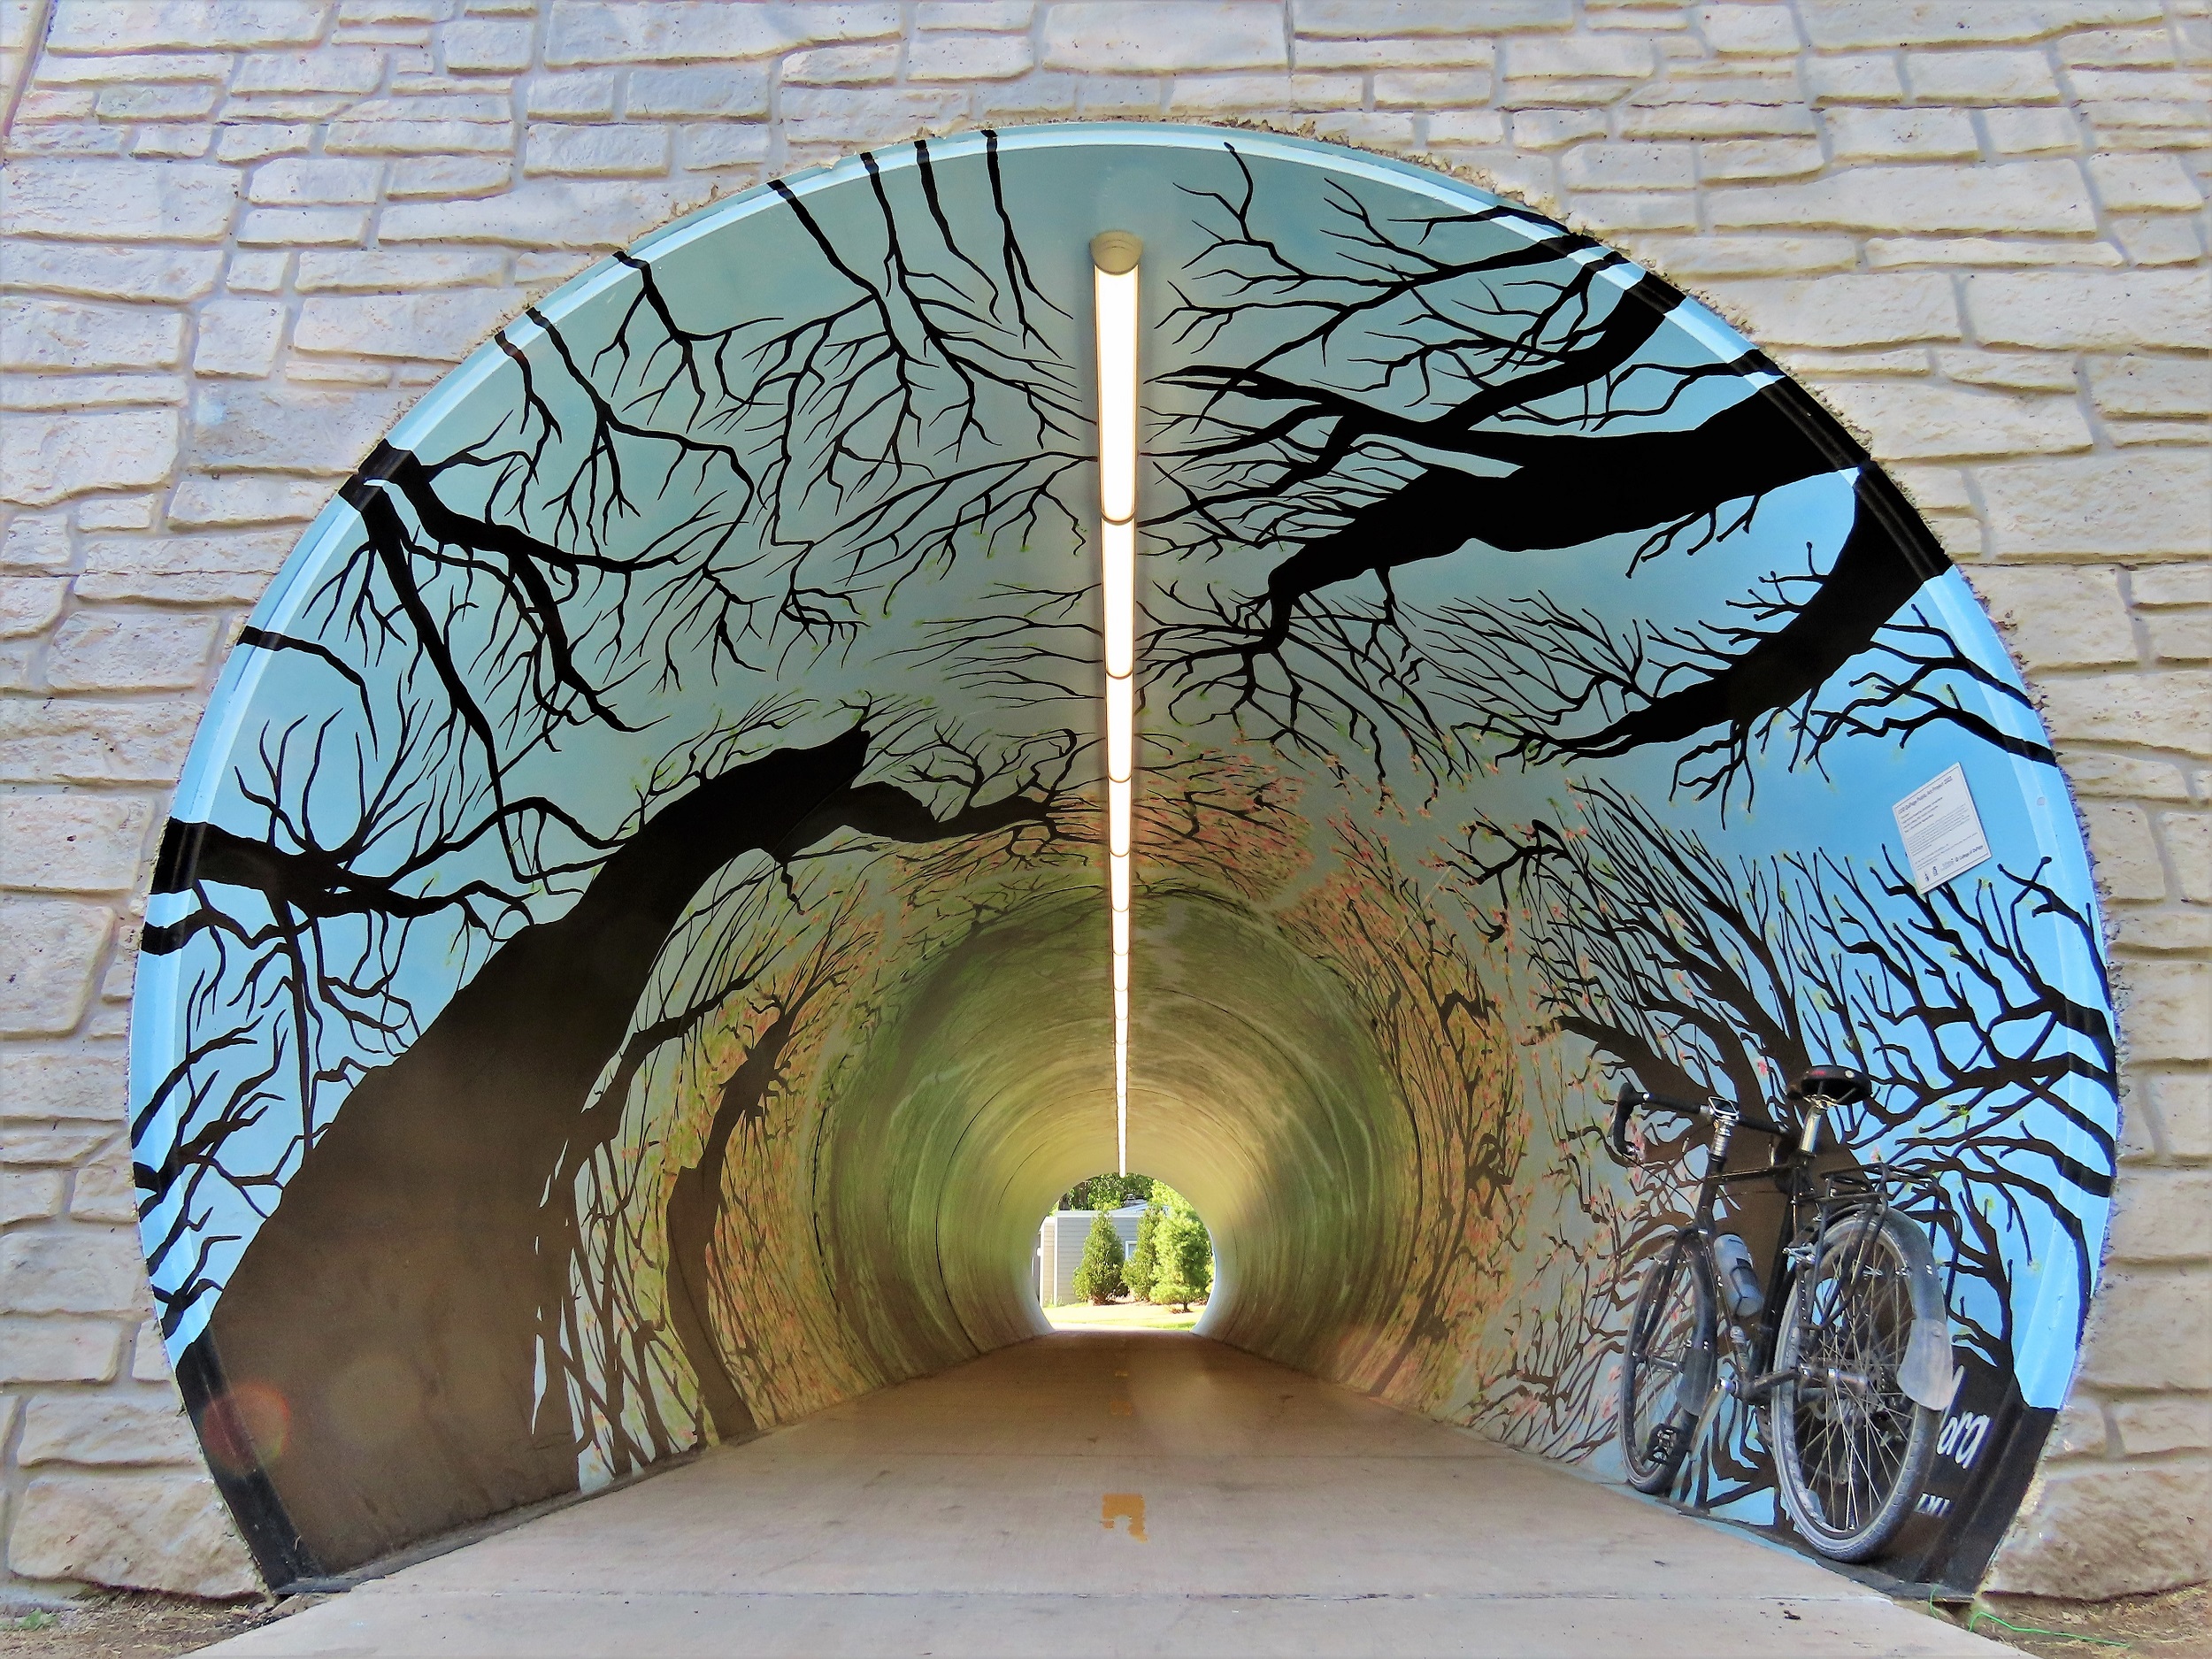 A tour bike leaning on just inside of a tunnel paionted light blue with dark leafless tree limbs representing winter.